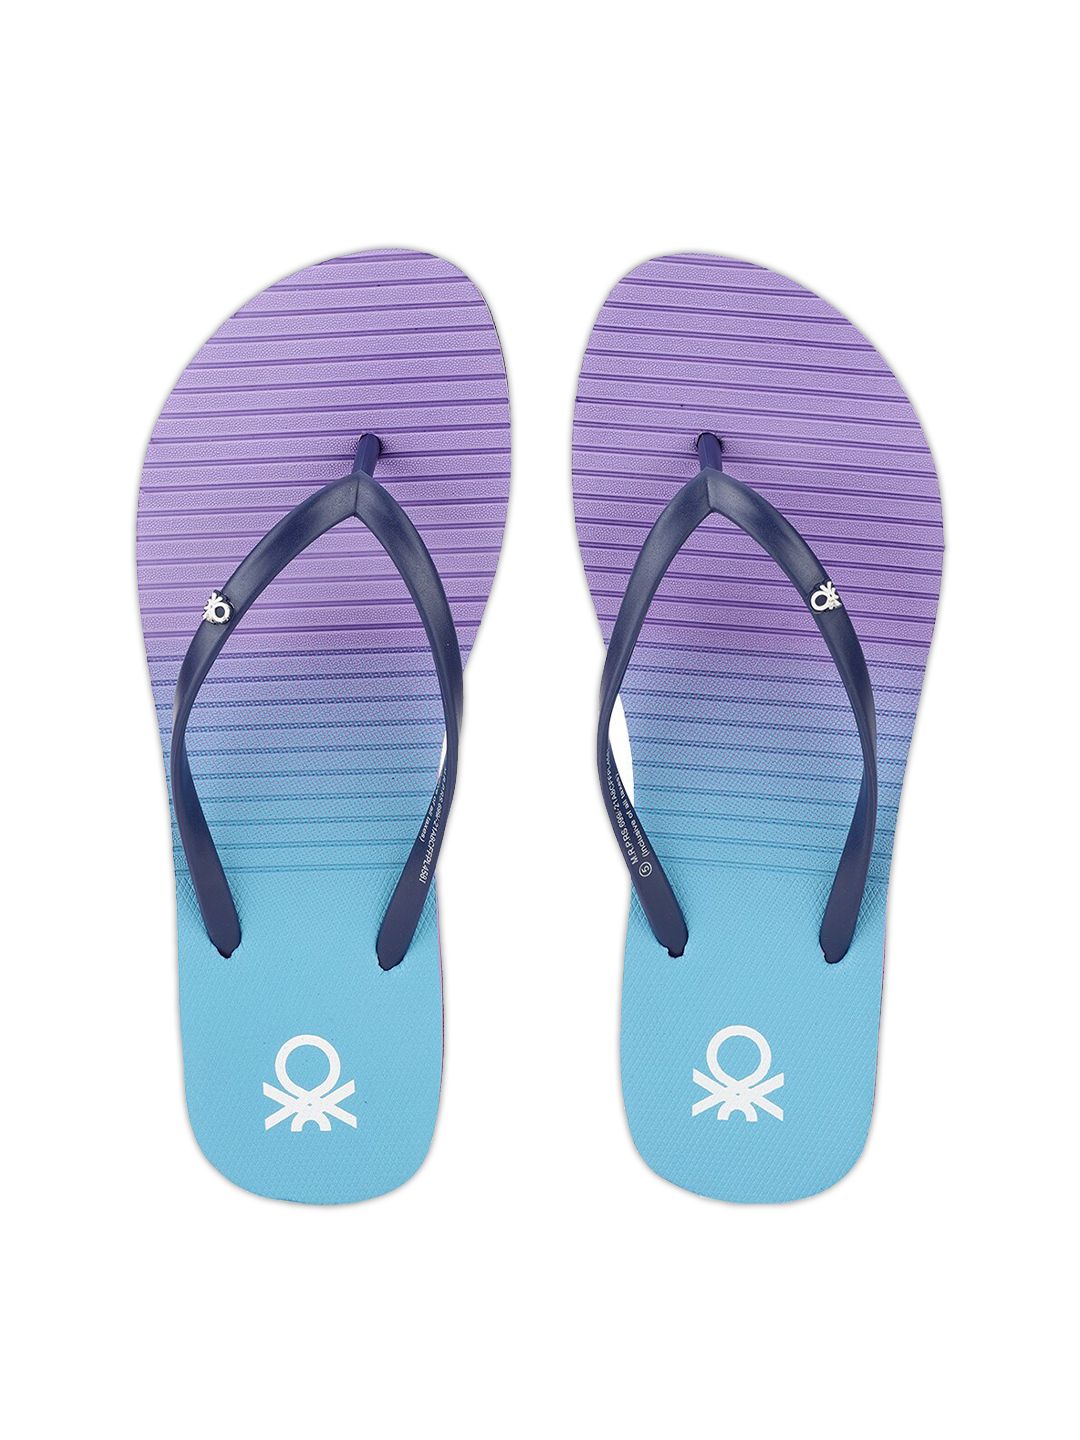 United Colors of Benetton Women Navy Blue & Purple Striped Thong Flip-Flops Price in India